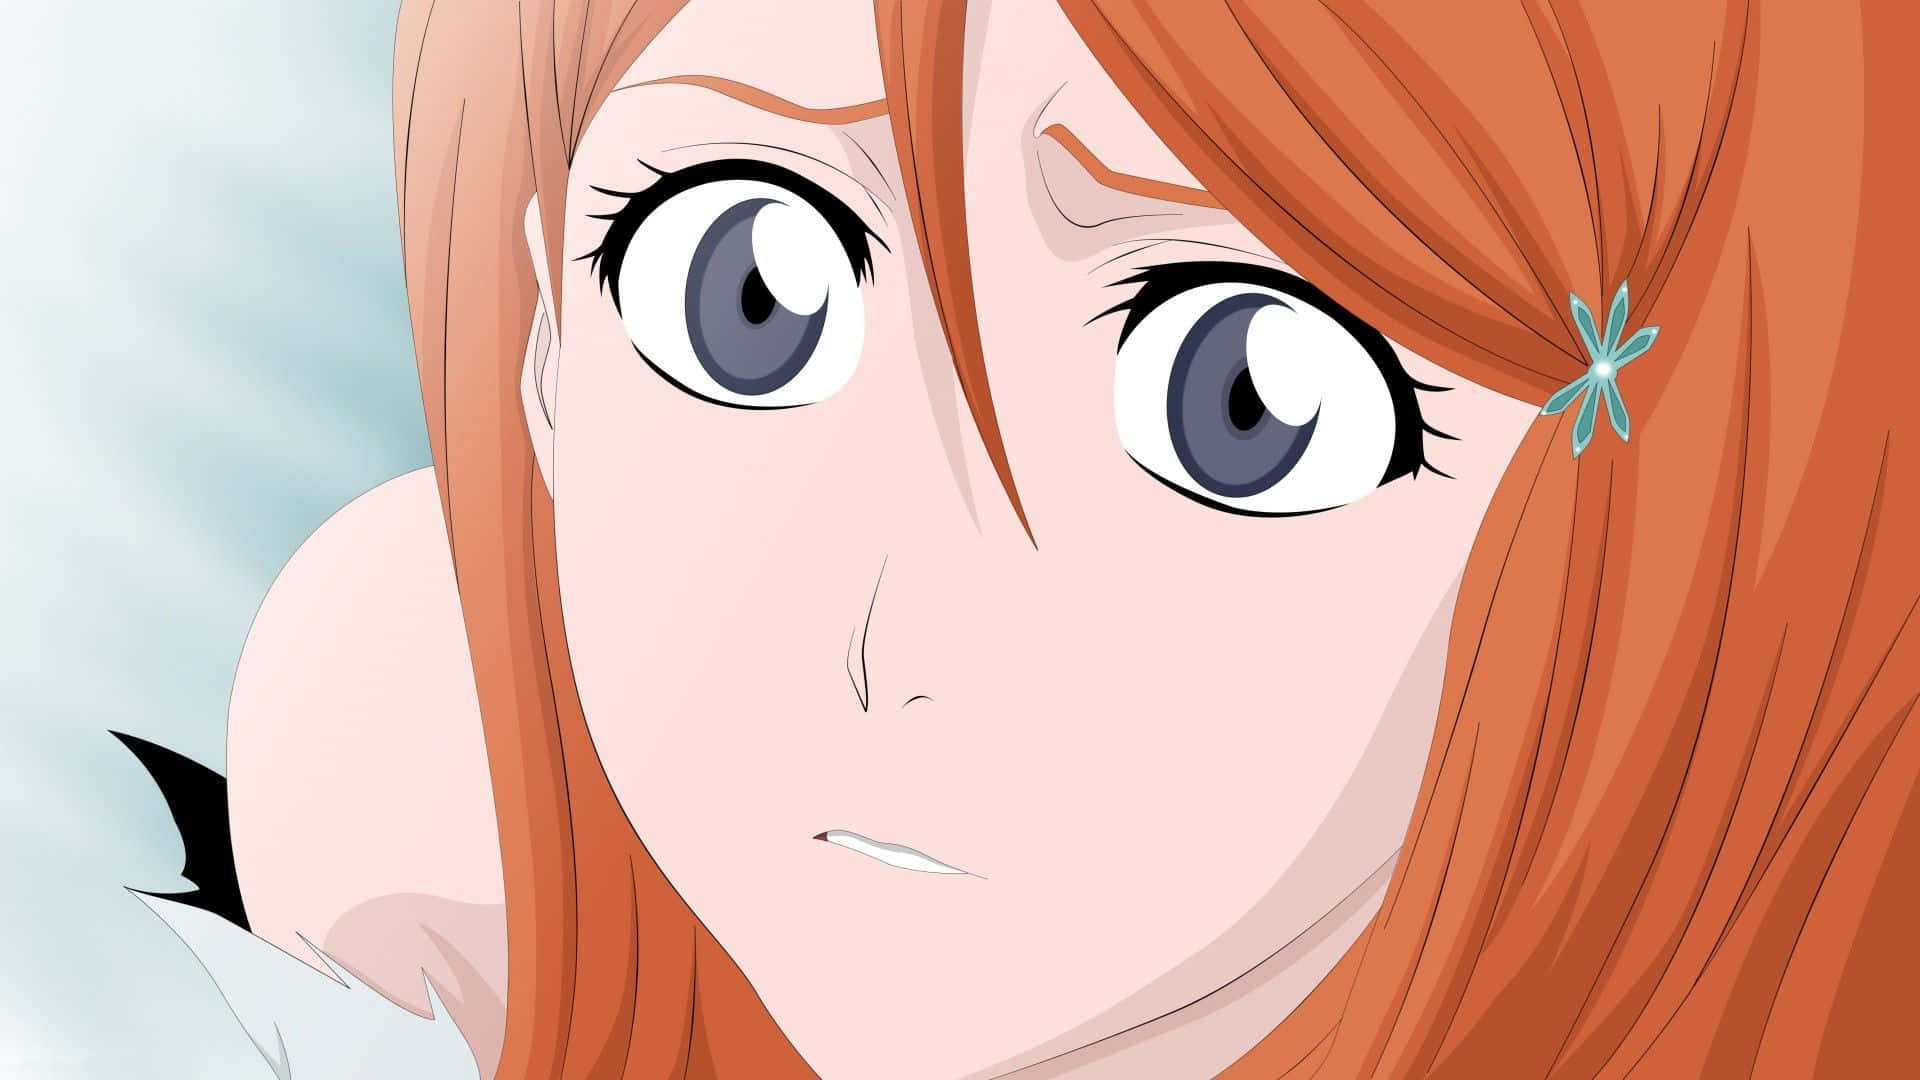 Orihime Inoue, on the Journey to Find Her Way" Wallpaper